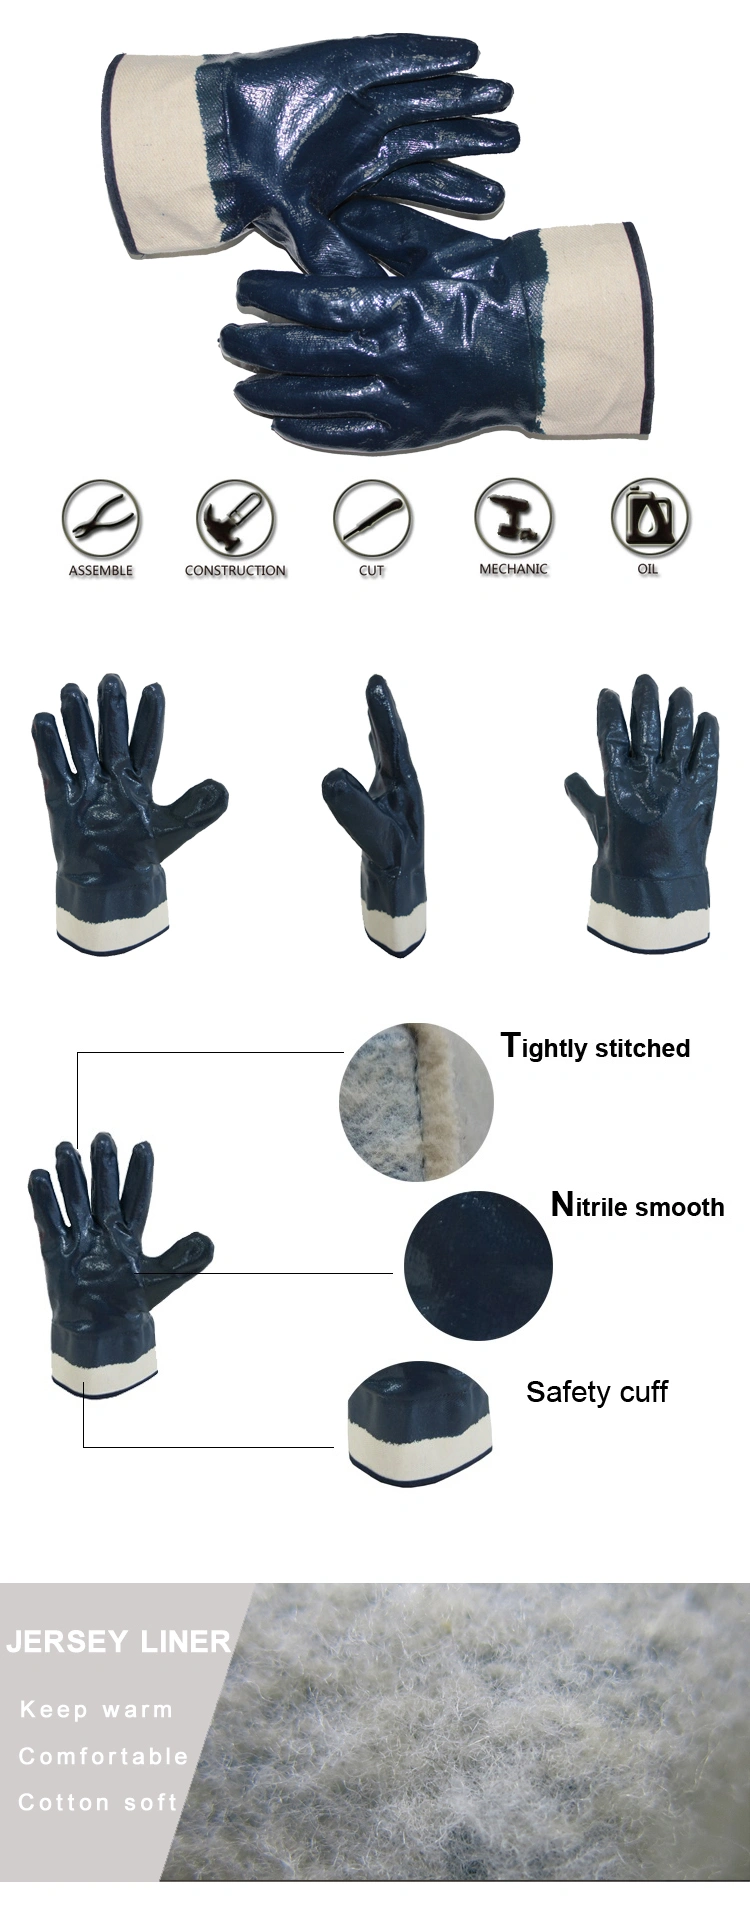 Ddsafety Blue Heavy Duty Nitrile Fully Coated with Safety Cuff Gloves for Construction Ce 4111